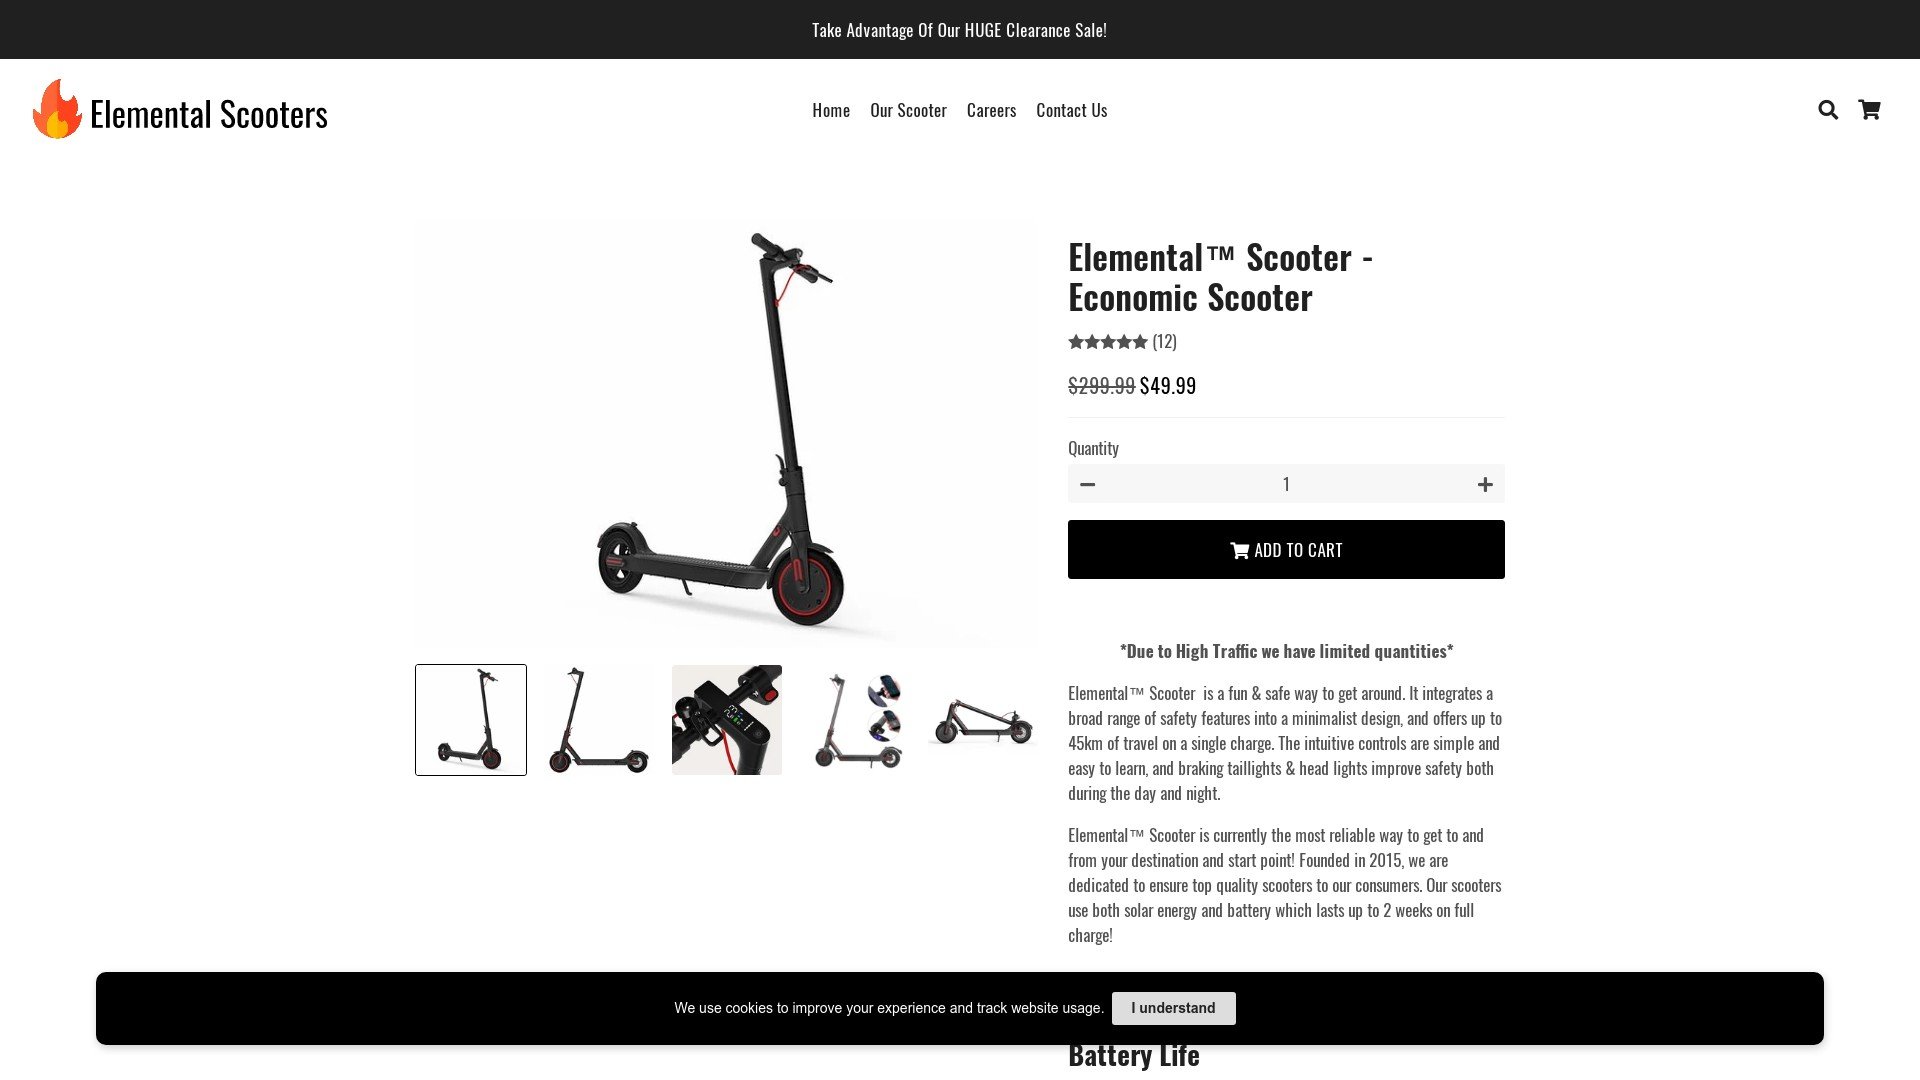 Elemental Scooters at elementalscooters.com